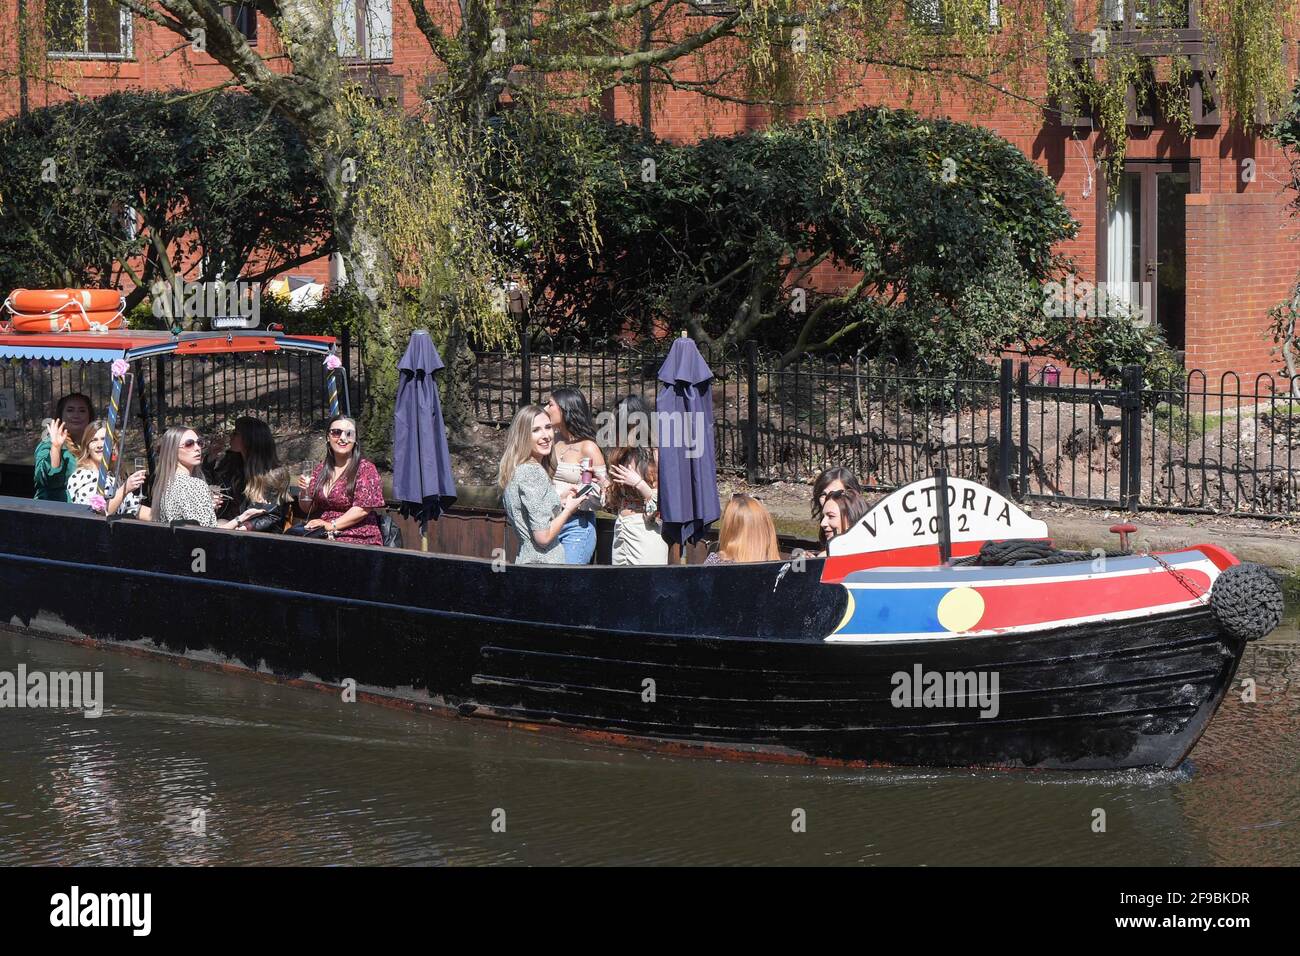 Birmingham city centre, UK. 17th Apr, 2021. A group of lady's enjoyed a canal boat trip in Birmingham city centre on 'Super Saturday'. Thousands of people came out despite the funeral of Prince Philip taking place today. Pubs and bars were full and streets were a sea of people. Pic by Credit: Ben Formby/Alamy Live News Stock Photo